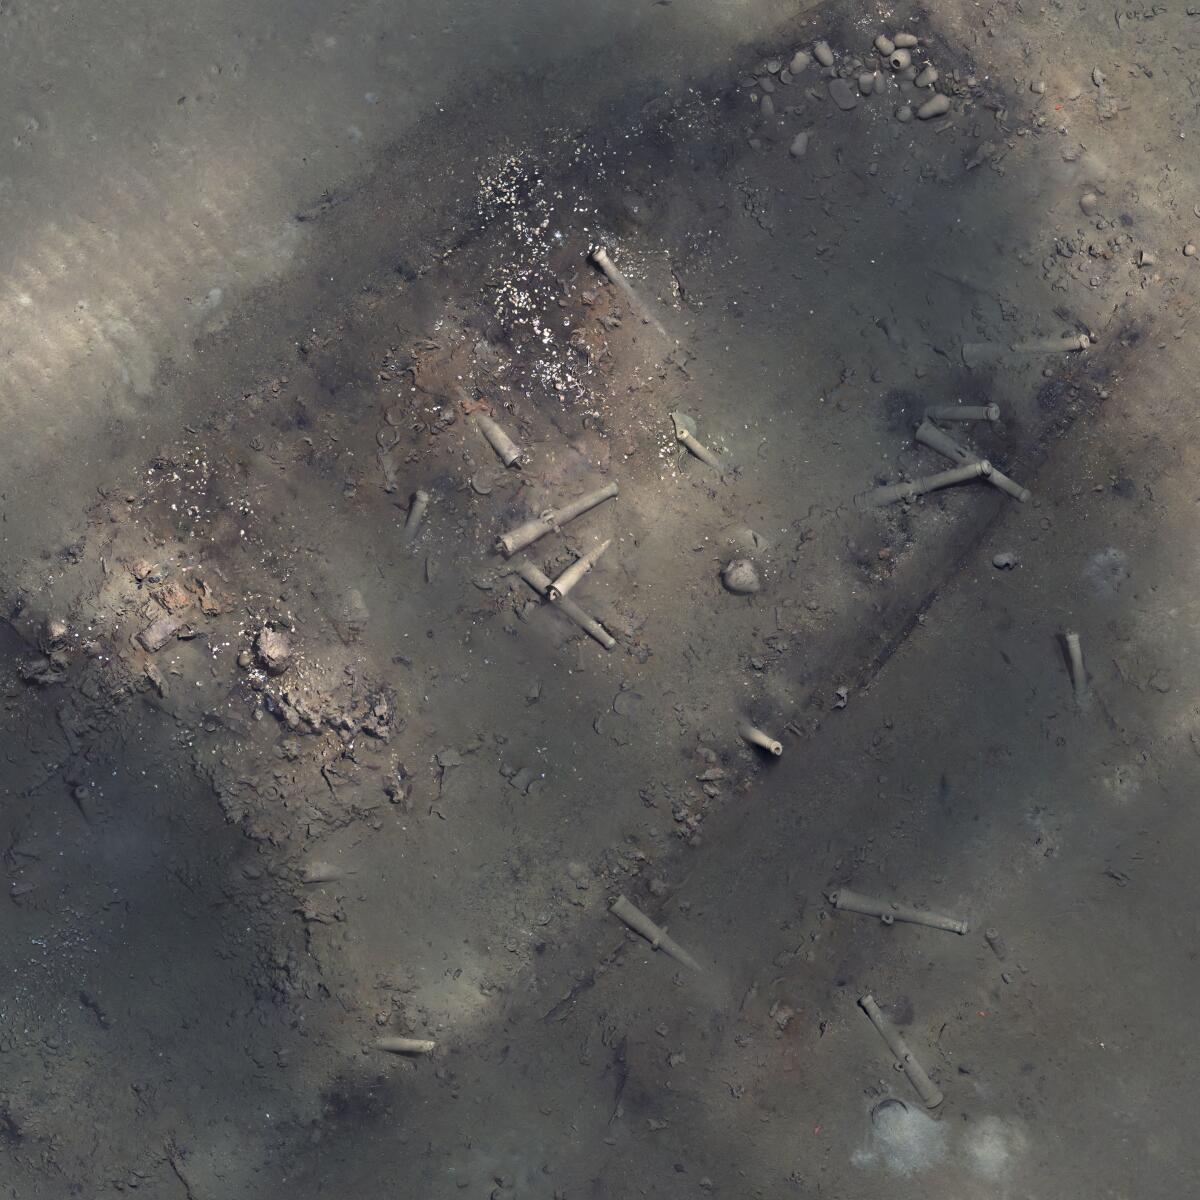 Image made from a mosaic of photos shows the remains of the Spanish galleon San Jose.